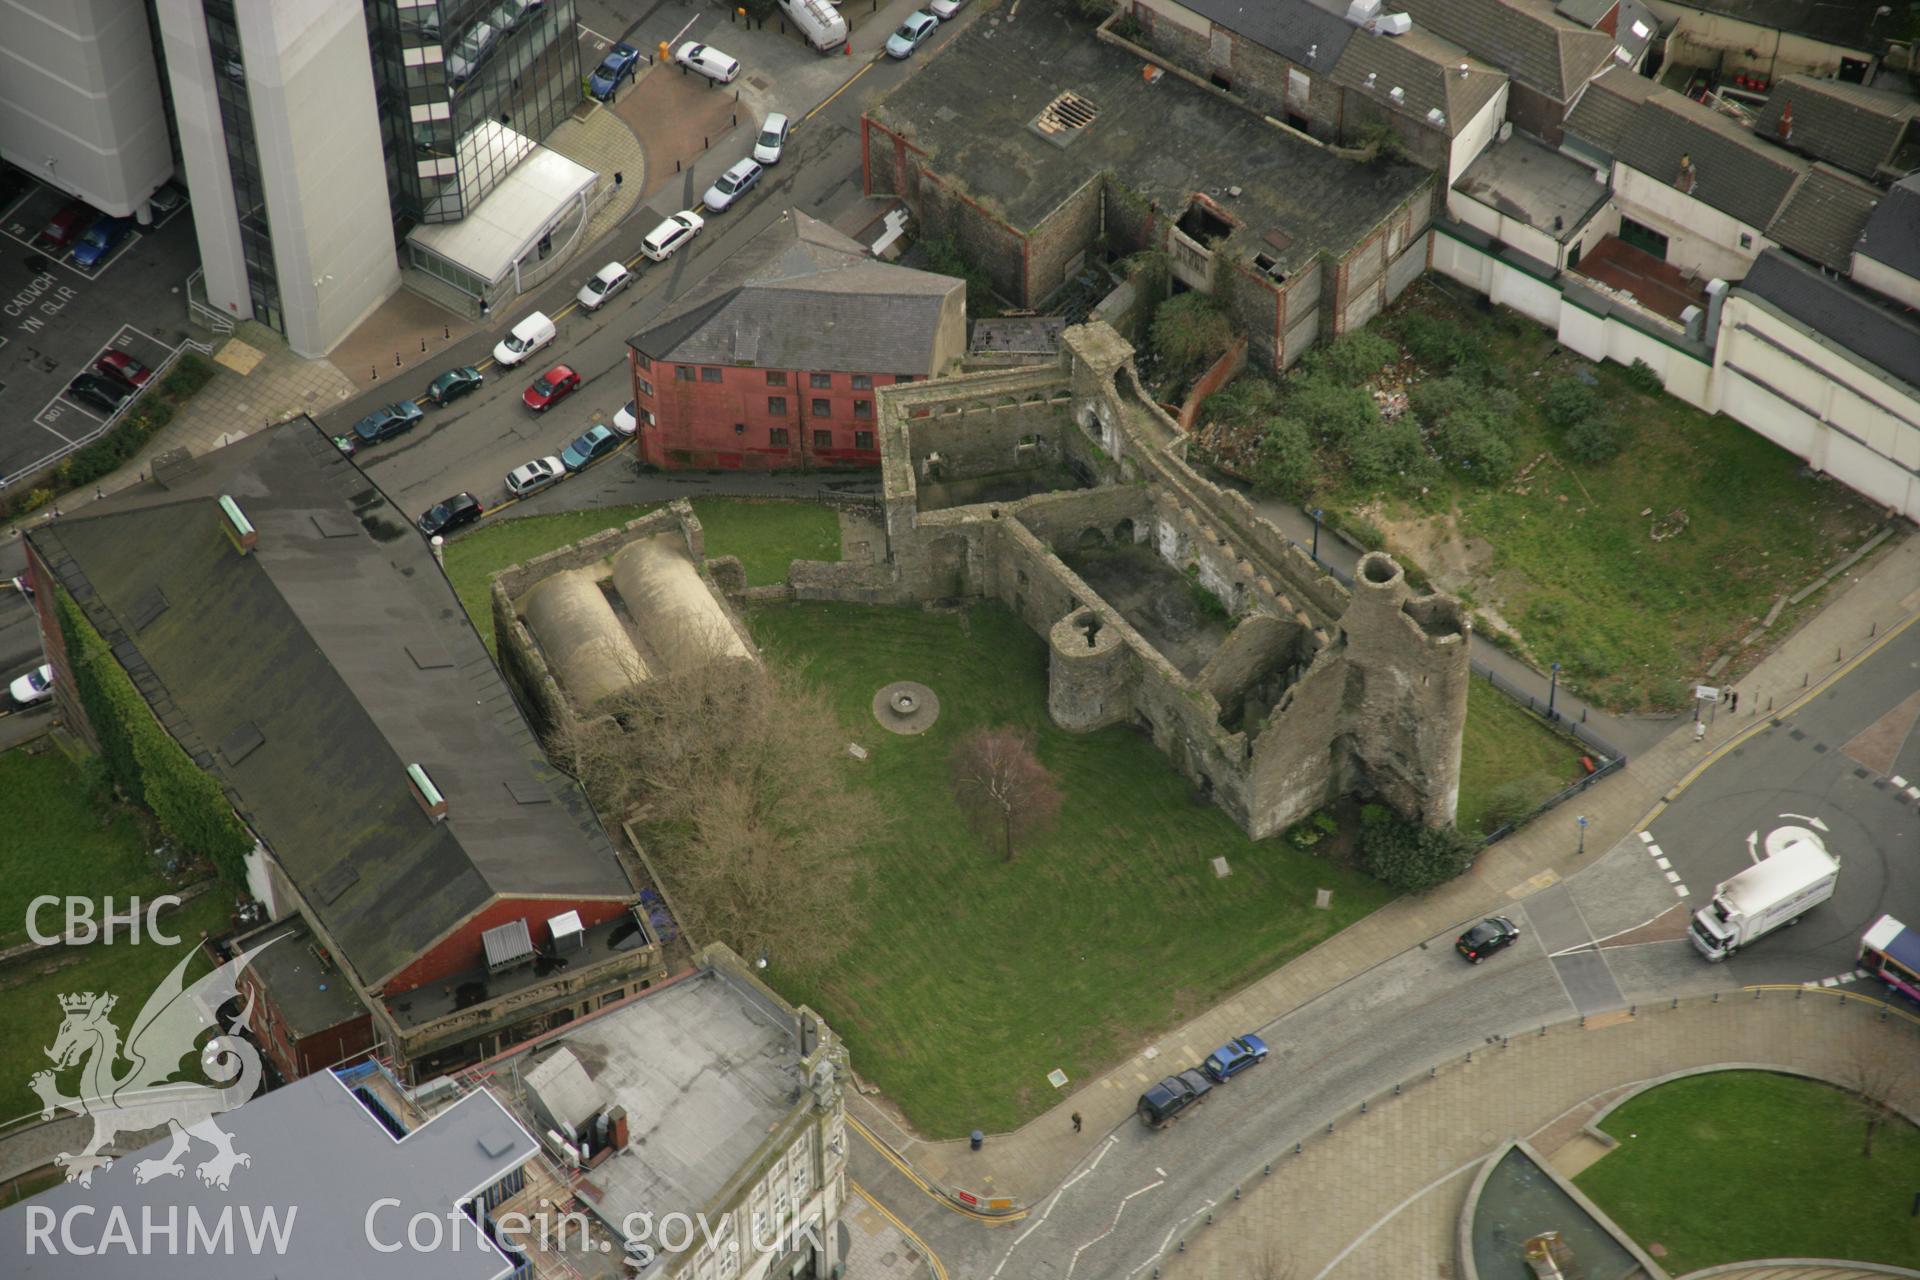 RCAHMW colour oblique aerial photograph of Swansea Castle, Swansea. Taken on 16 March 2007 by Toby Driver